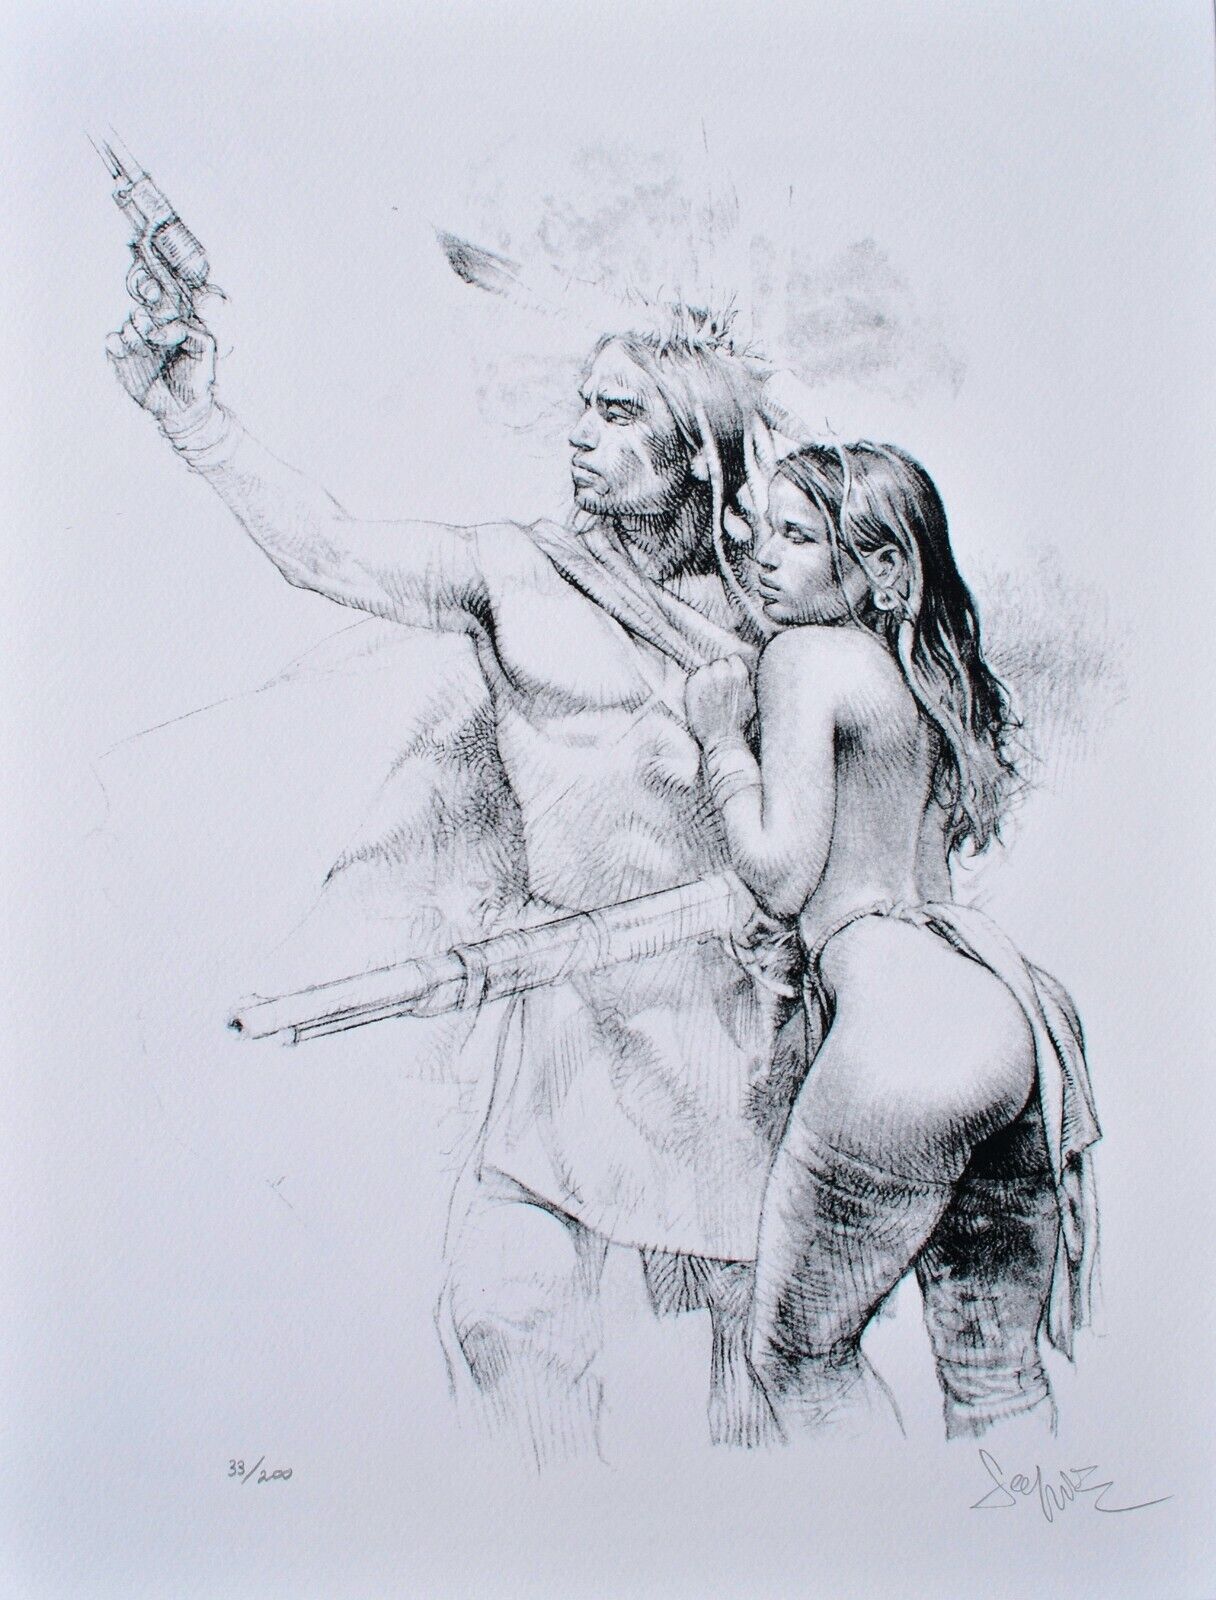 Paolo Serpieri: The Protector, Print Offset Erotic Signed, 200ex, 2009